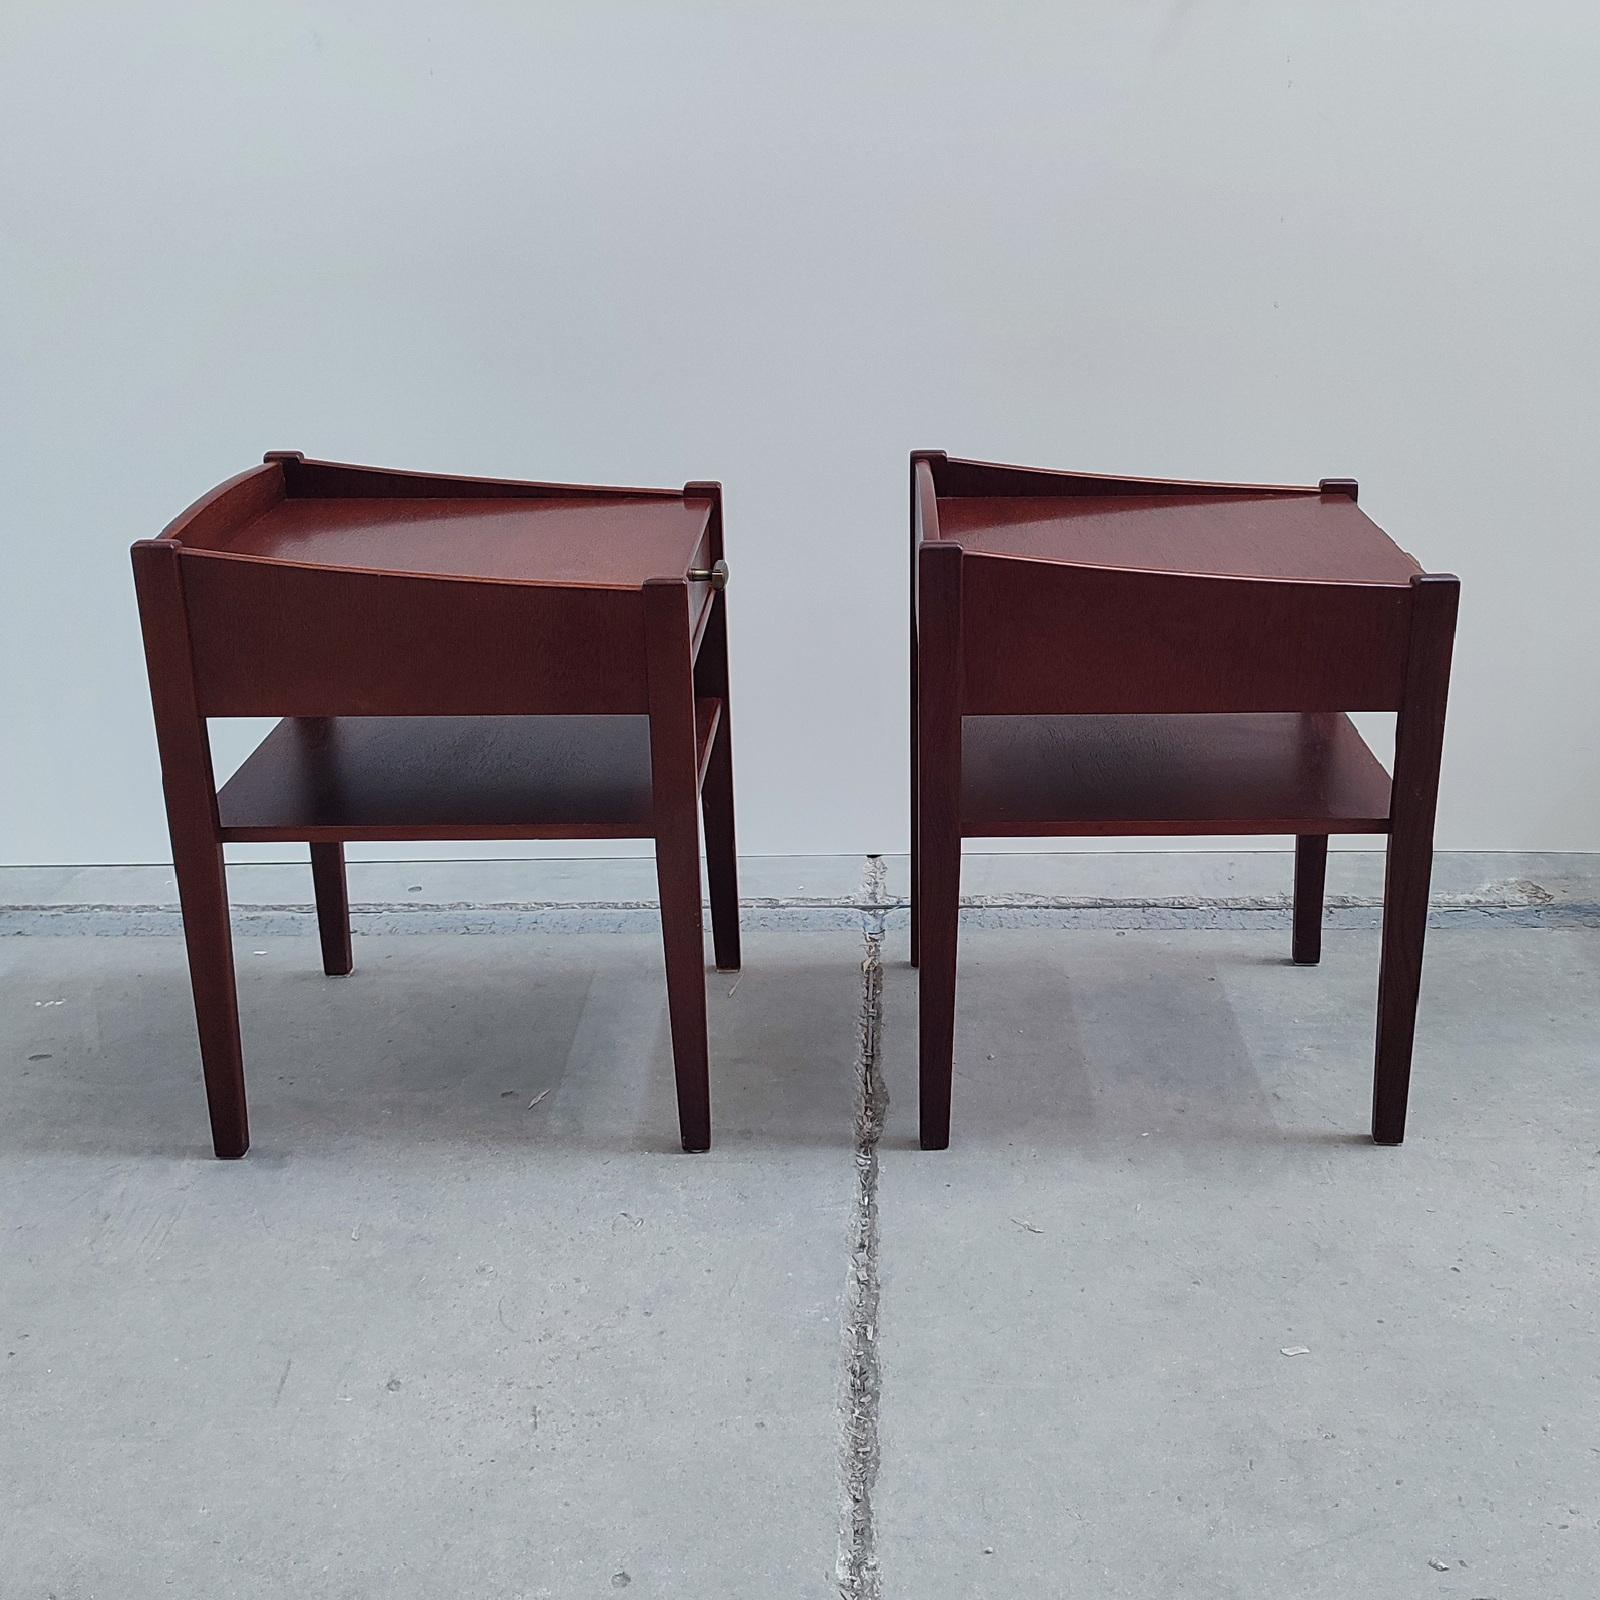 Stained Pair of Mid-century Swedish Mahogany Nightstands, Bedside Tables, 1960s For Sale